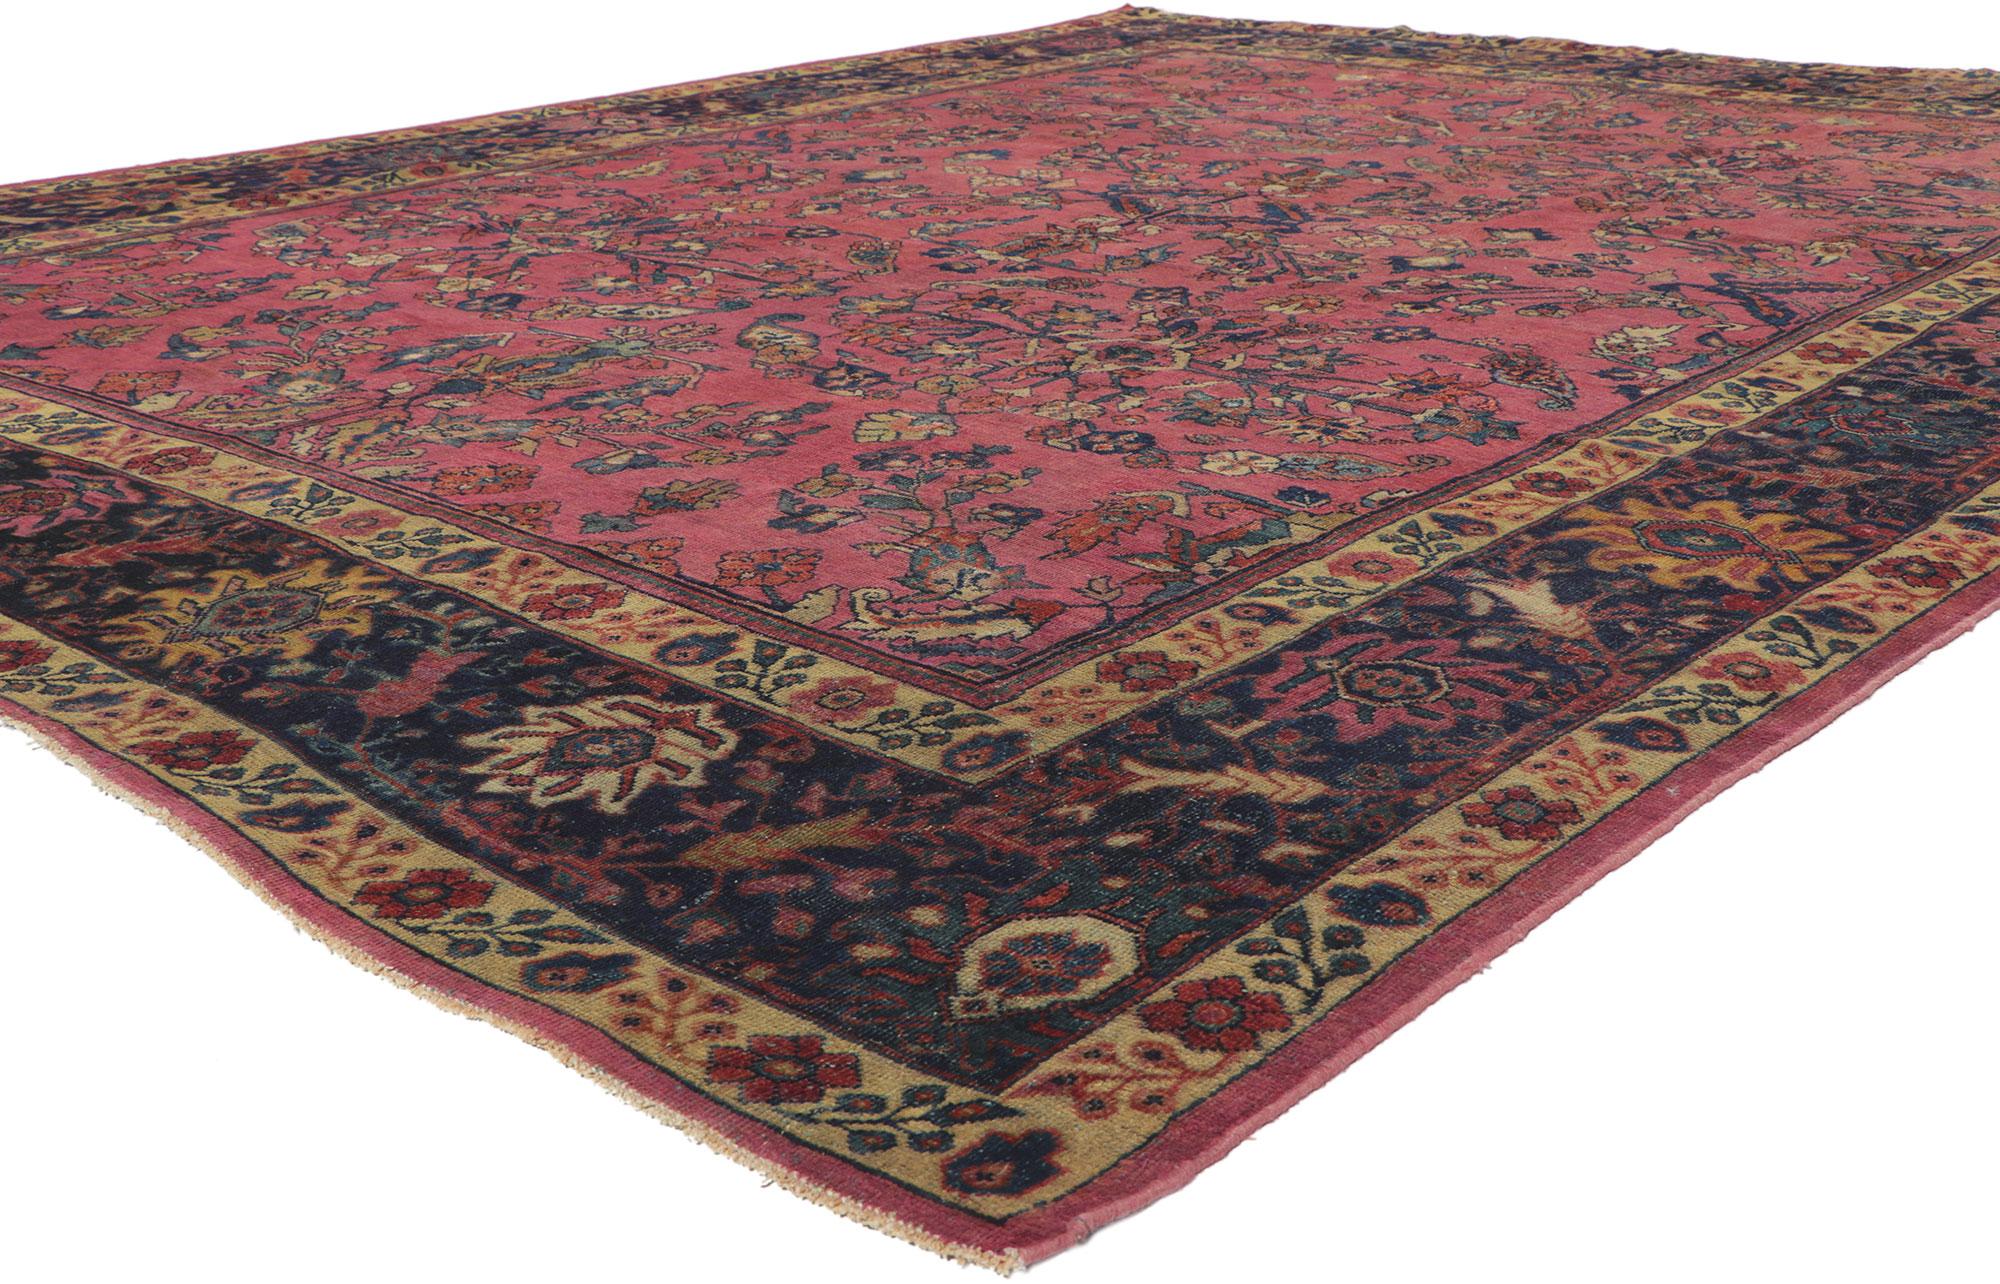 71419 Antique Pink Persian Mahal Rug, 08'10 x 11'05. Hailing from the Mahallat region in central Northwestern Iran, Persian Mahal rugs are renowned for their distinctive features and exceptional craftsmanship. These rugs are distinguished by their